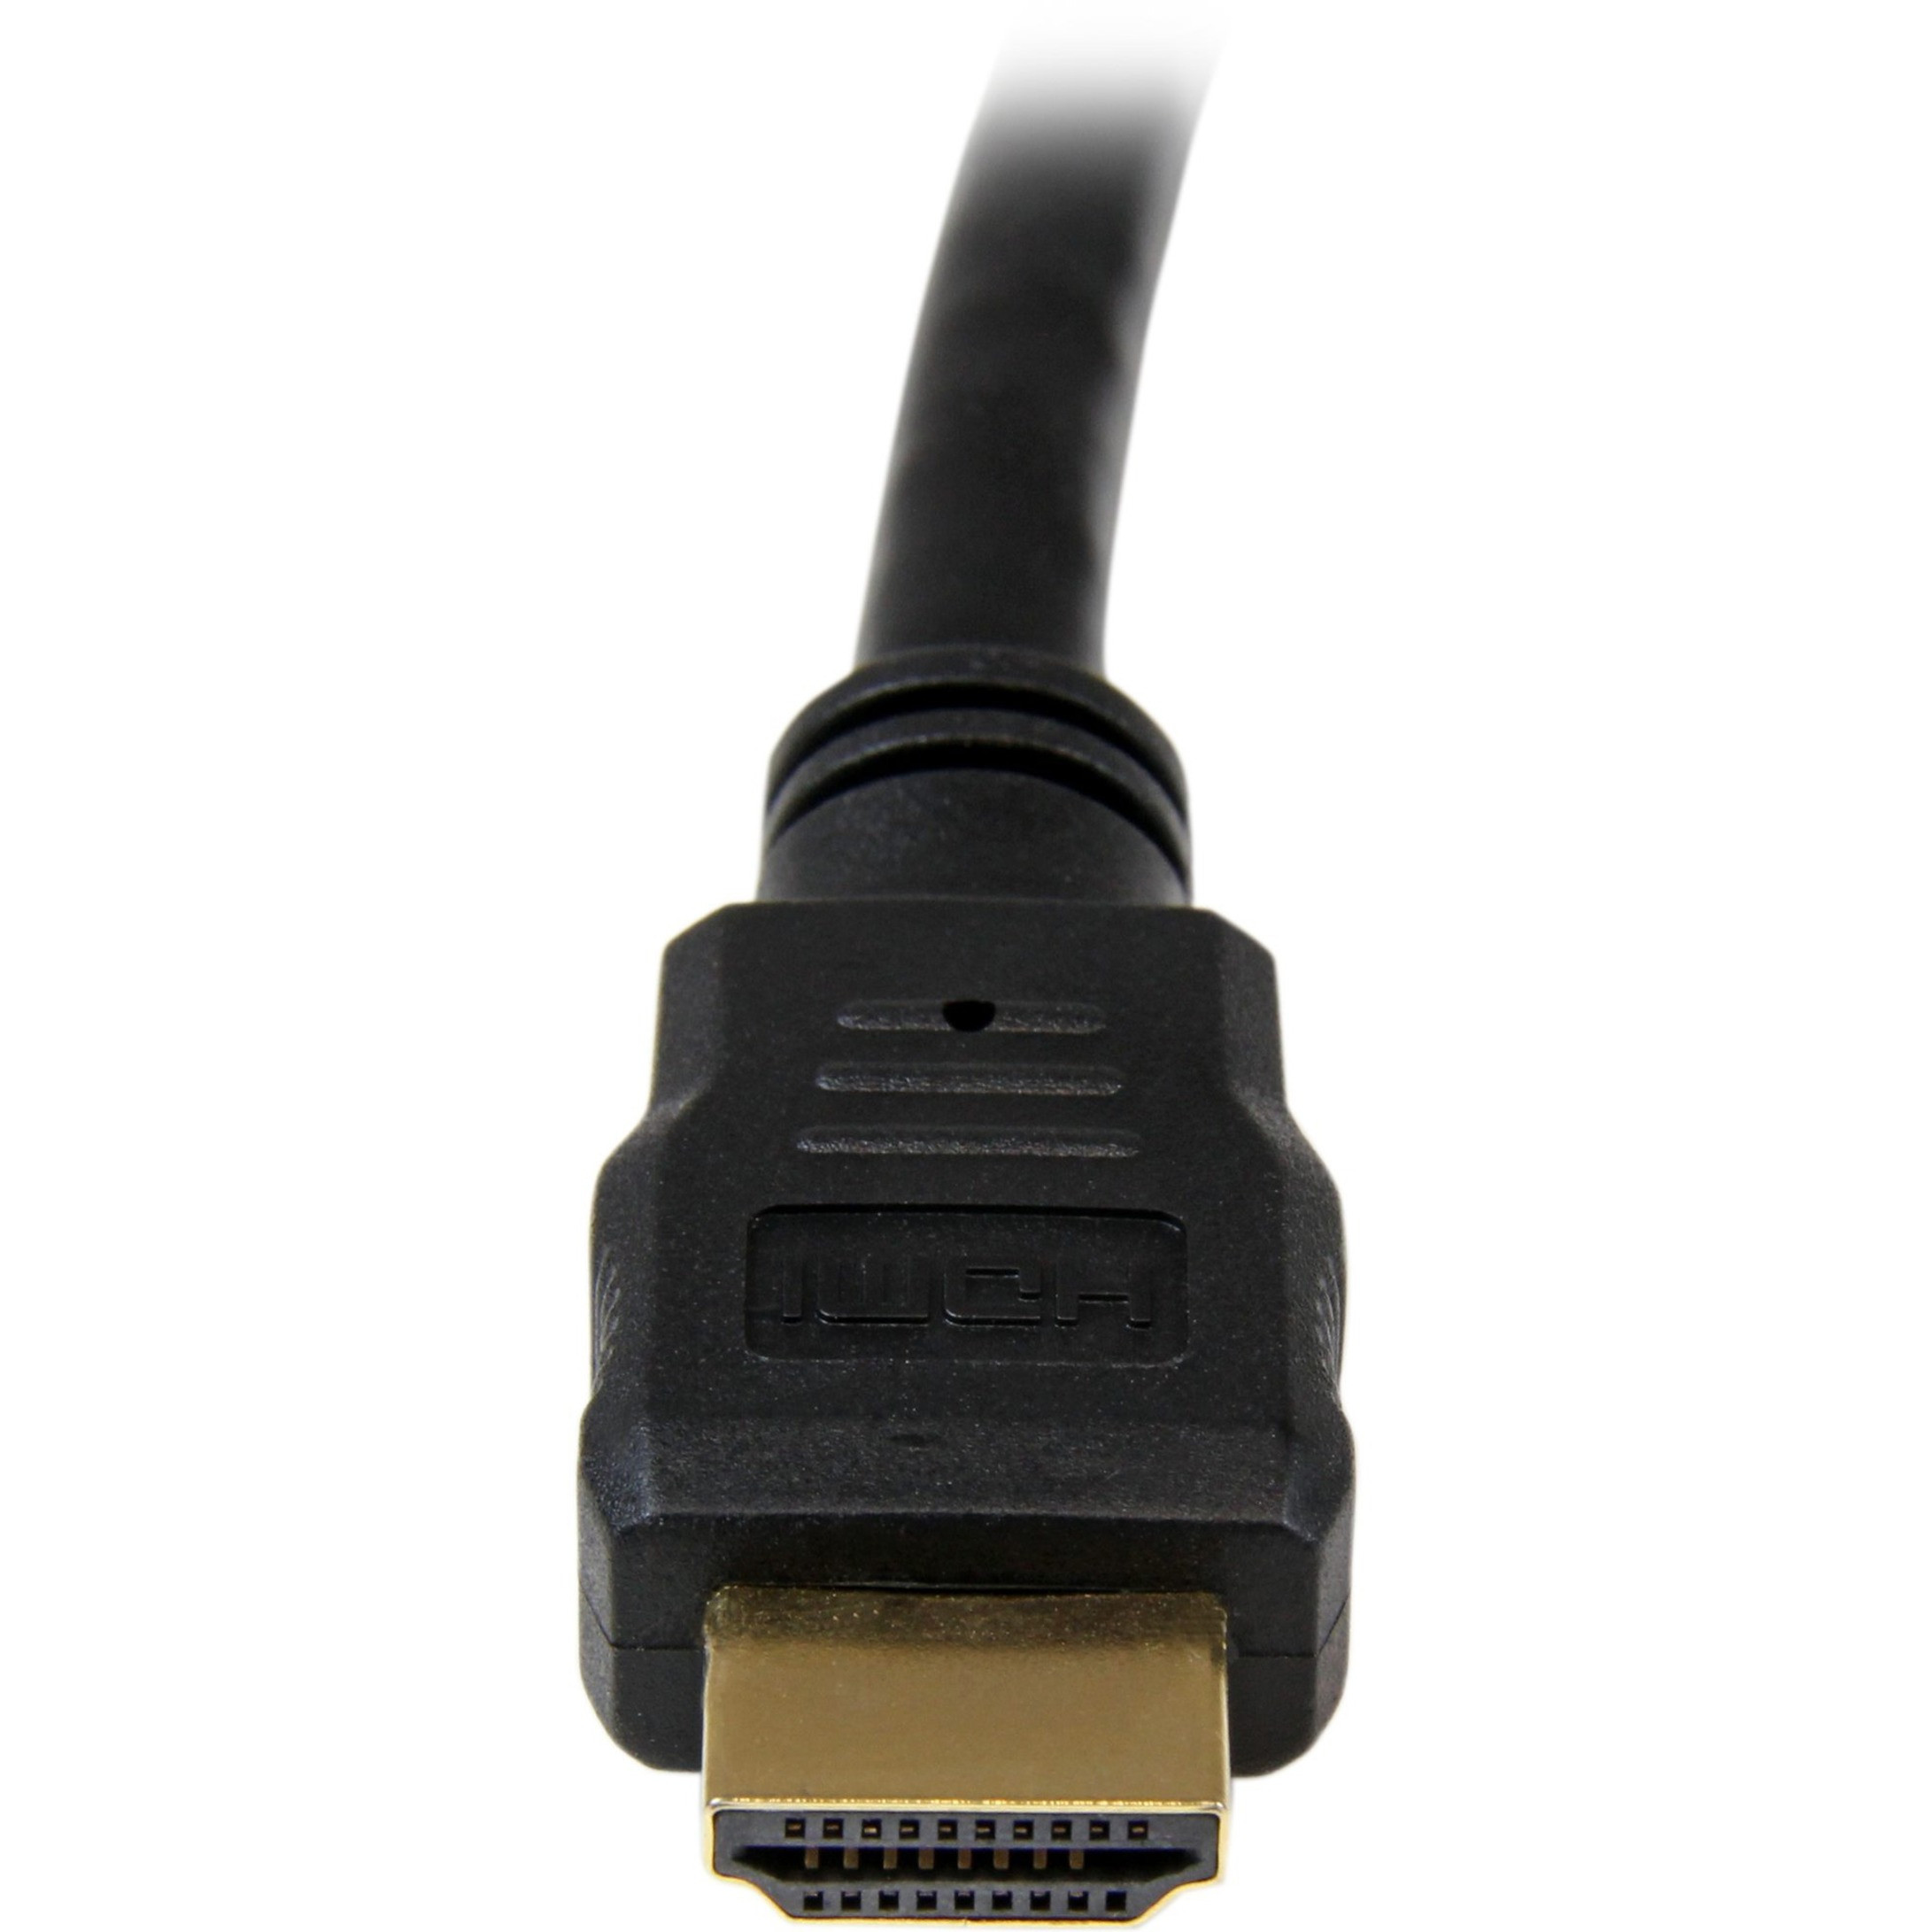 15ft (4.6m) HDMI Cable - 4K High Speed HDMI Cable with Ethernet - UHD 4K  30Hz Video - HDMI 1.4 Cable - Ultra HD HDMI Monitors, Projectors, TVs 